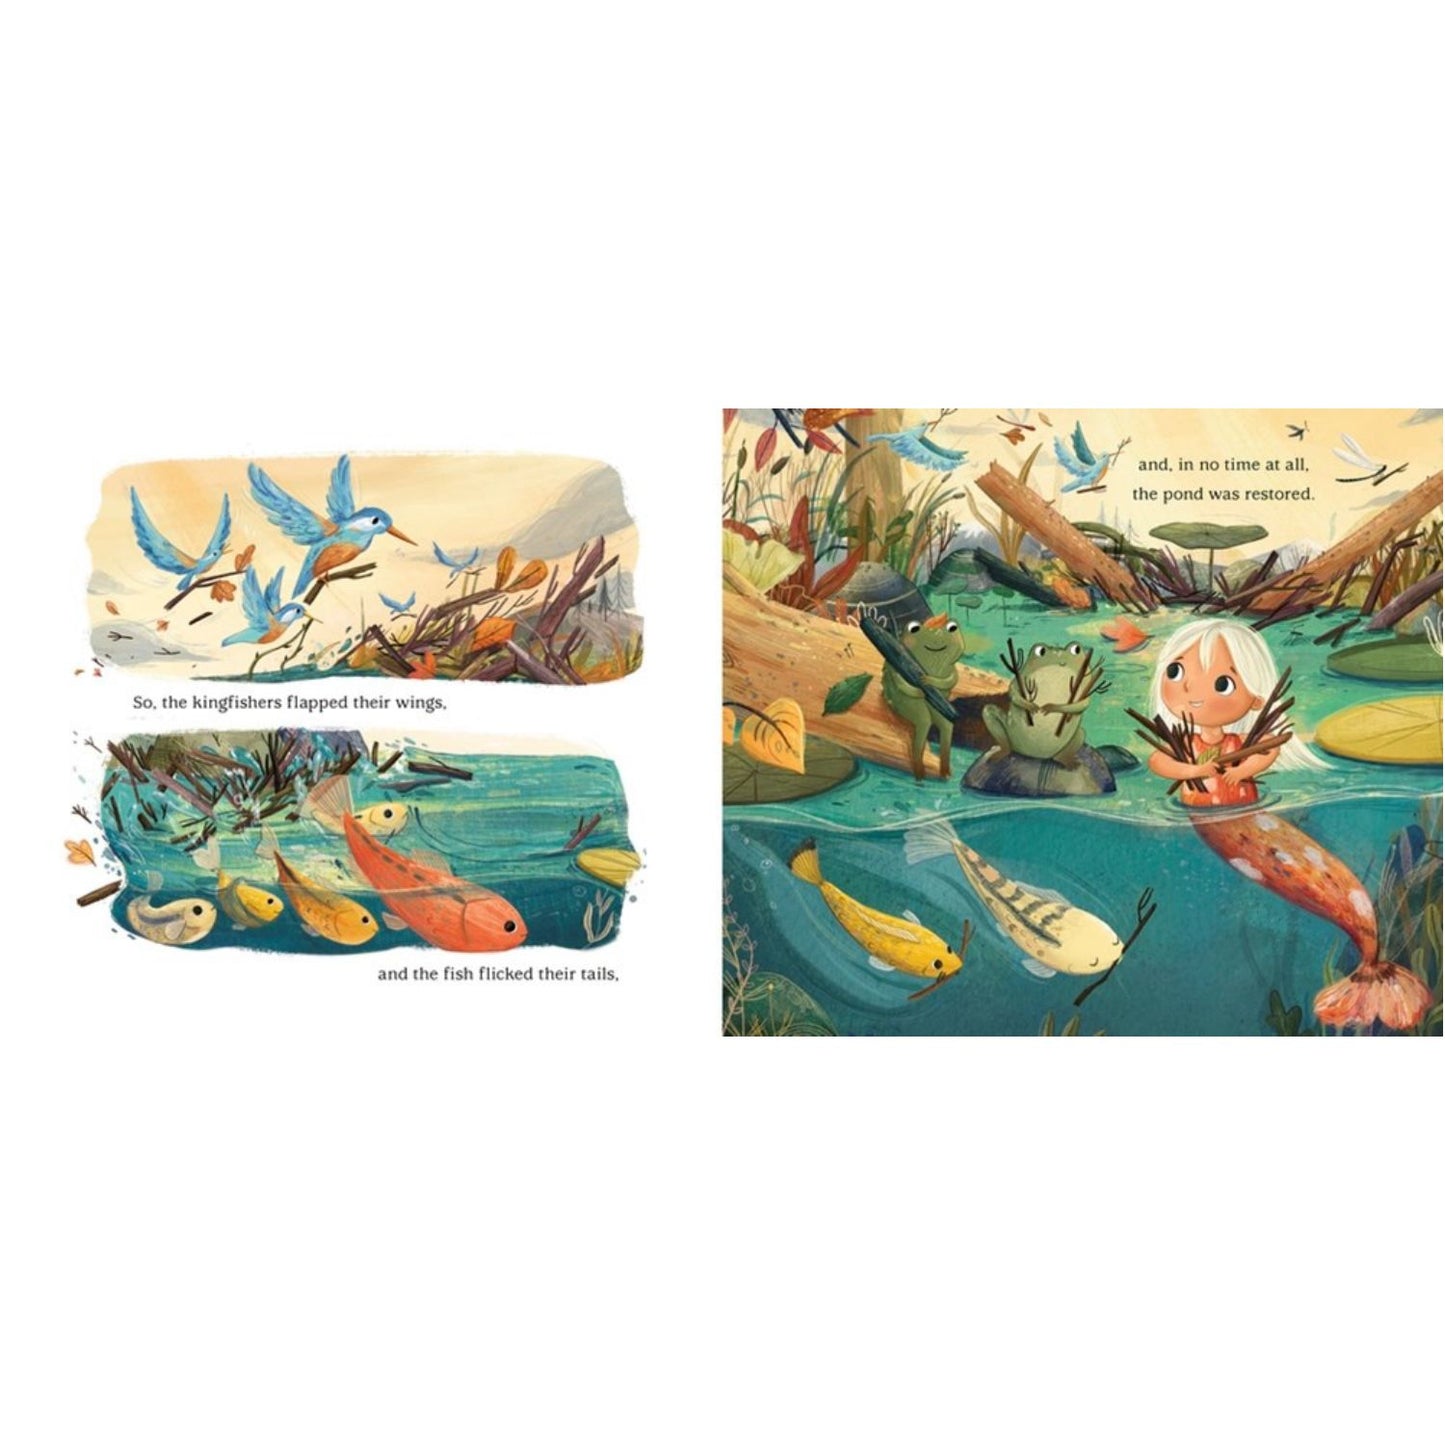 Lily the Pond Mermaid | Hardcover | Children’s Book on Friendship